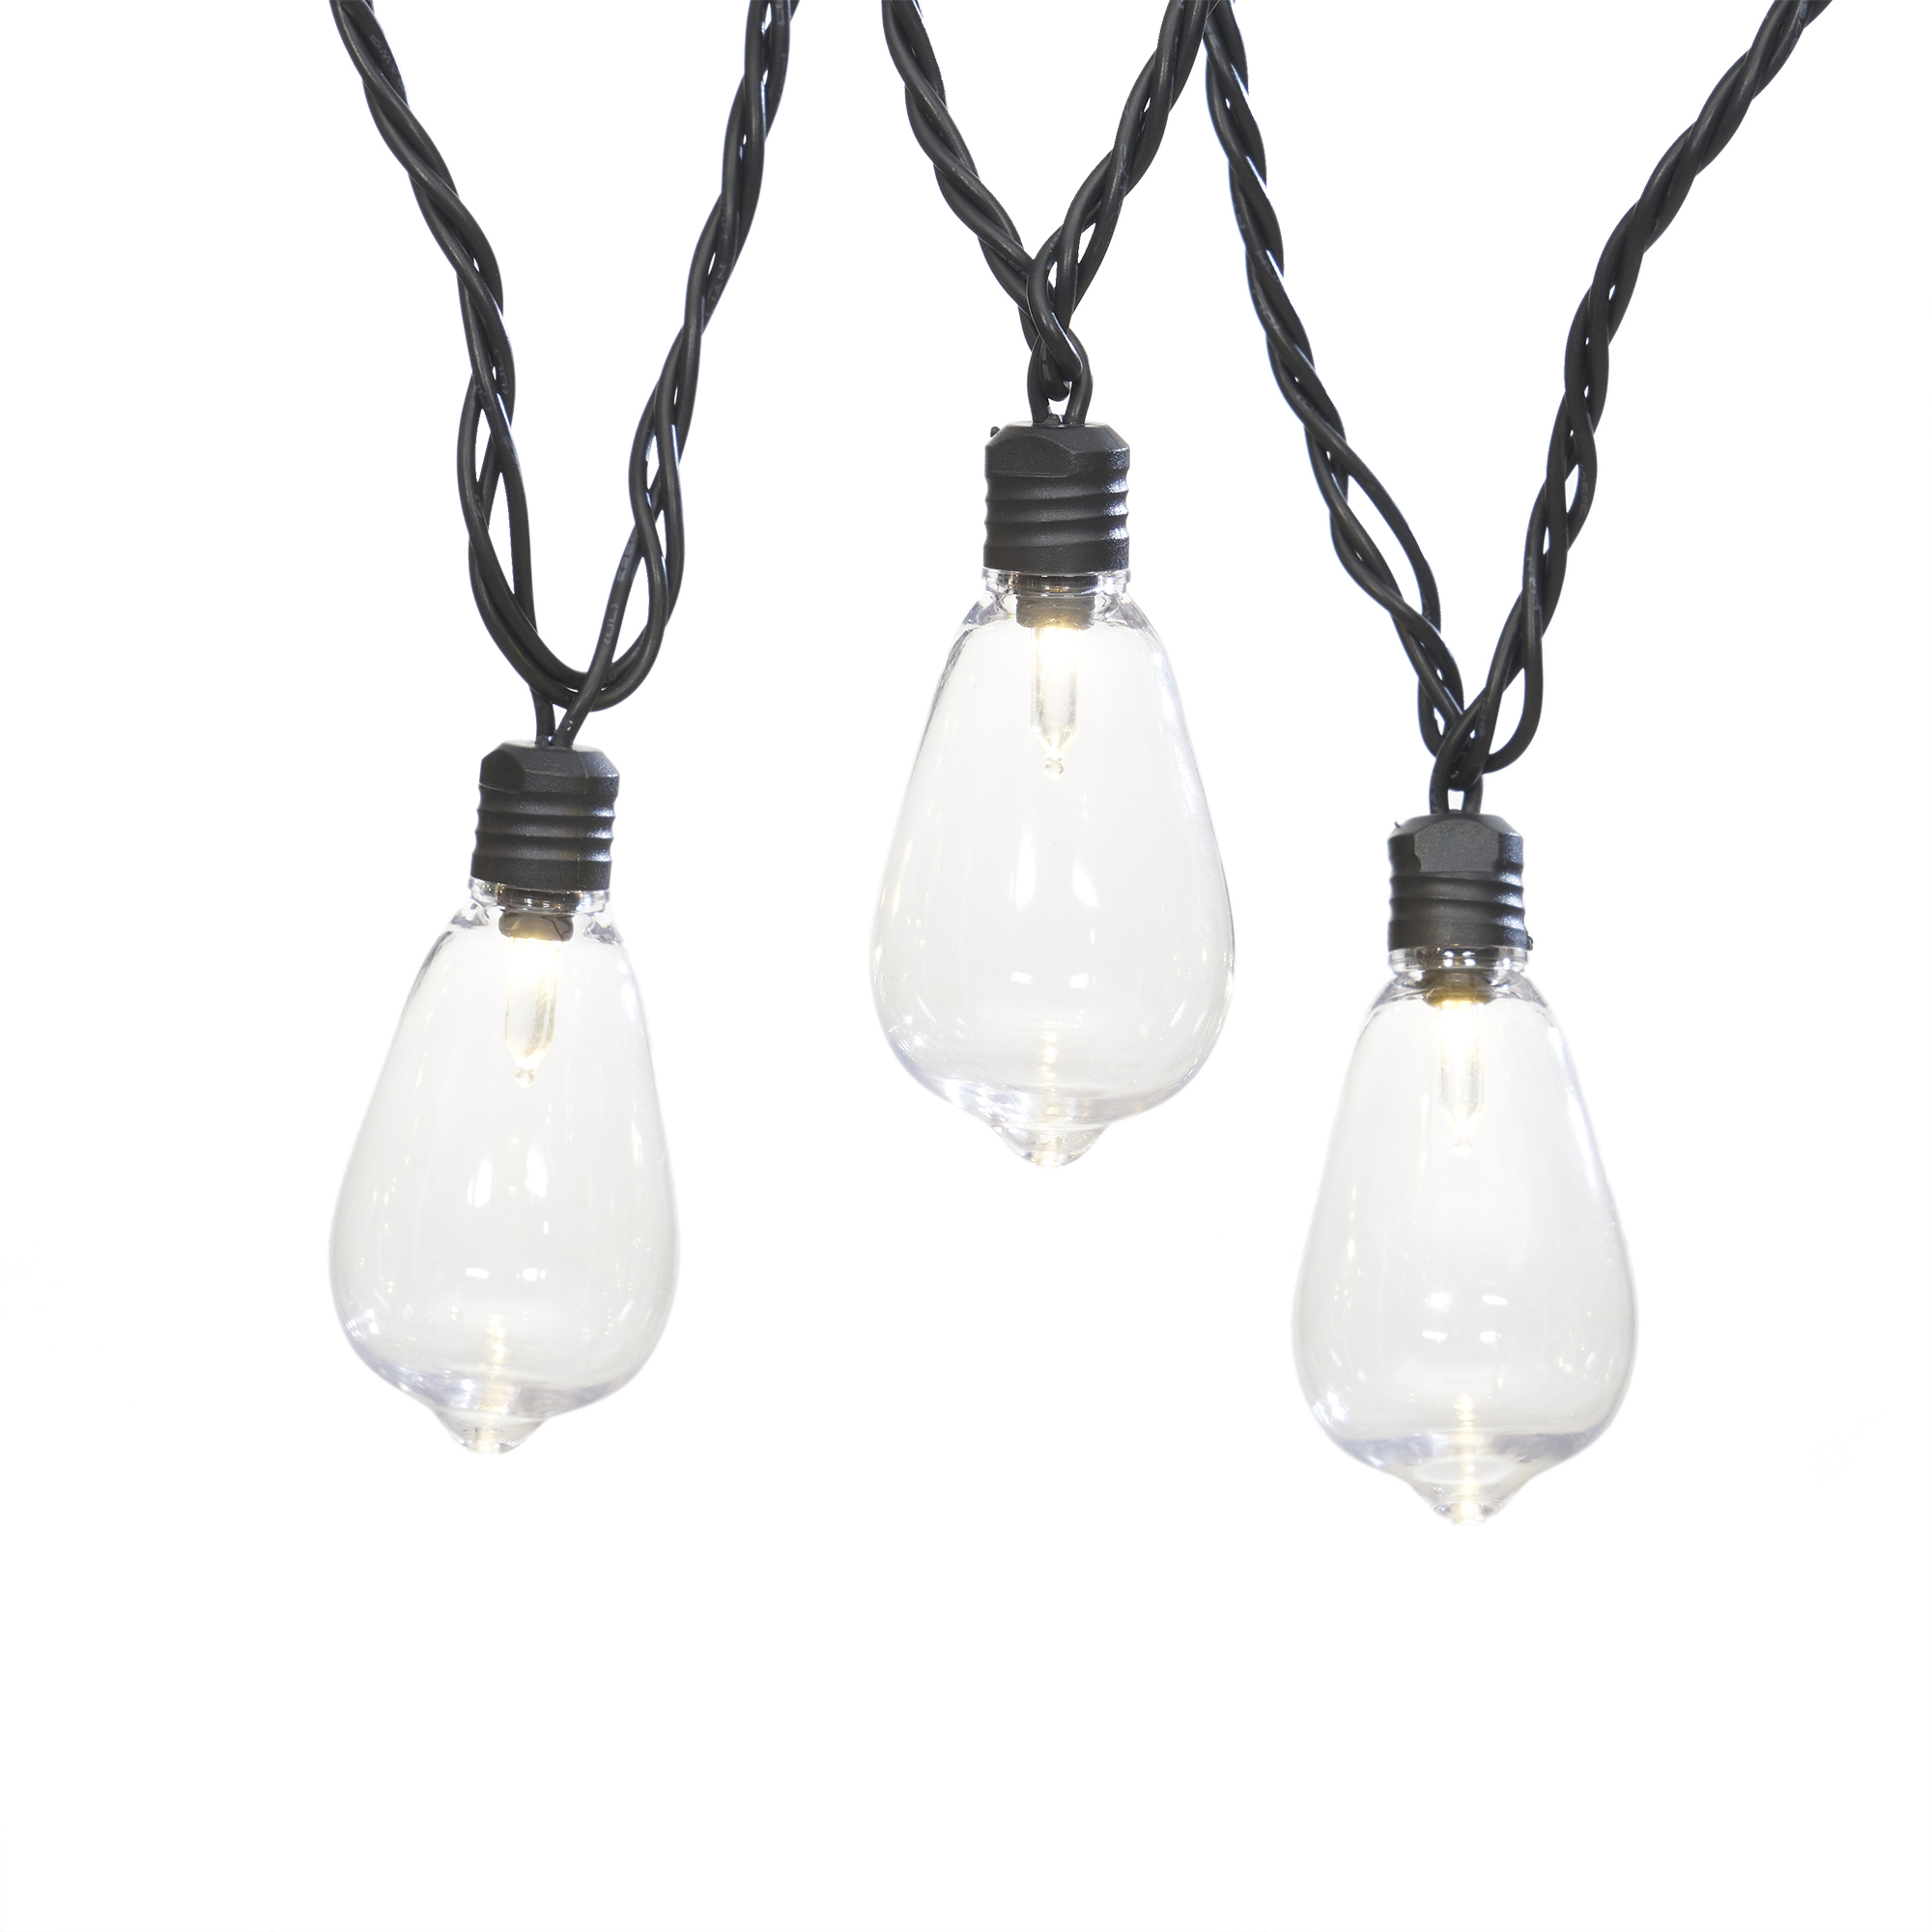 Mainstays 35-Count LED Edison Bulb Outdoor String Lights - image 1 of 9